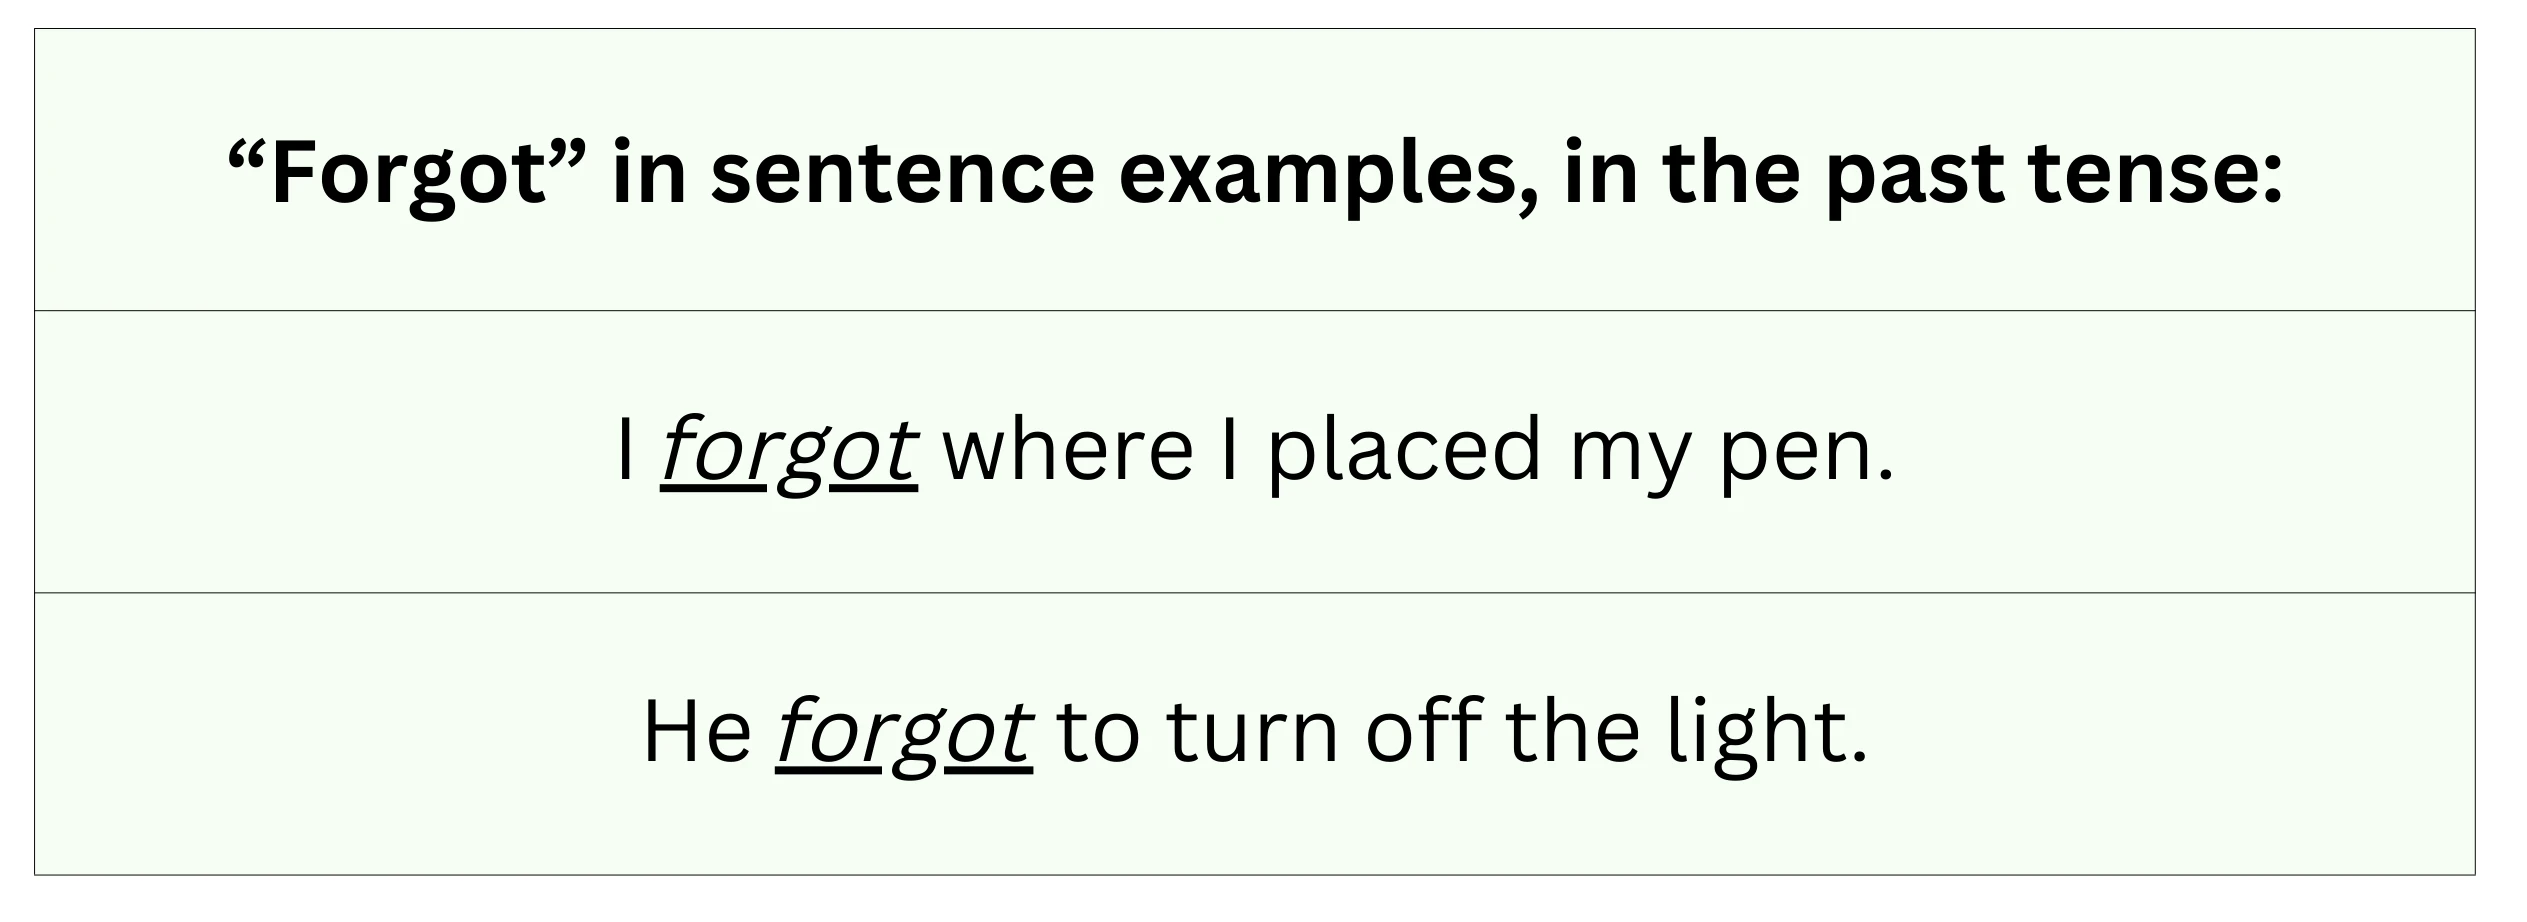 The past tense of forget (i.e., forgot) in sentences.